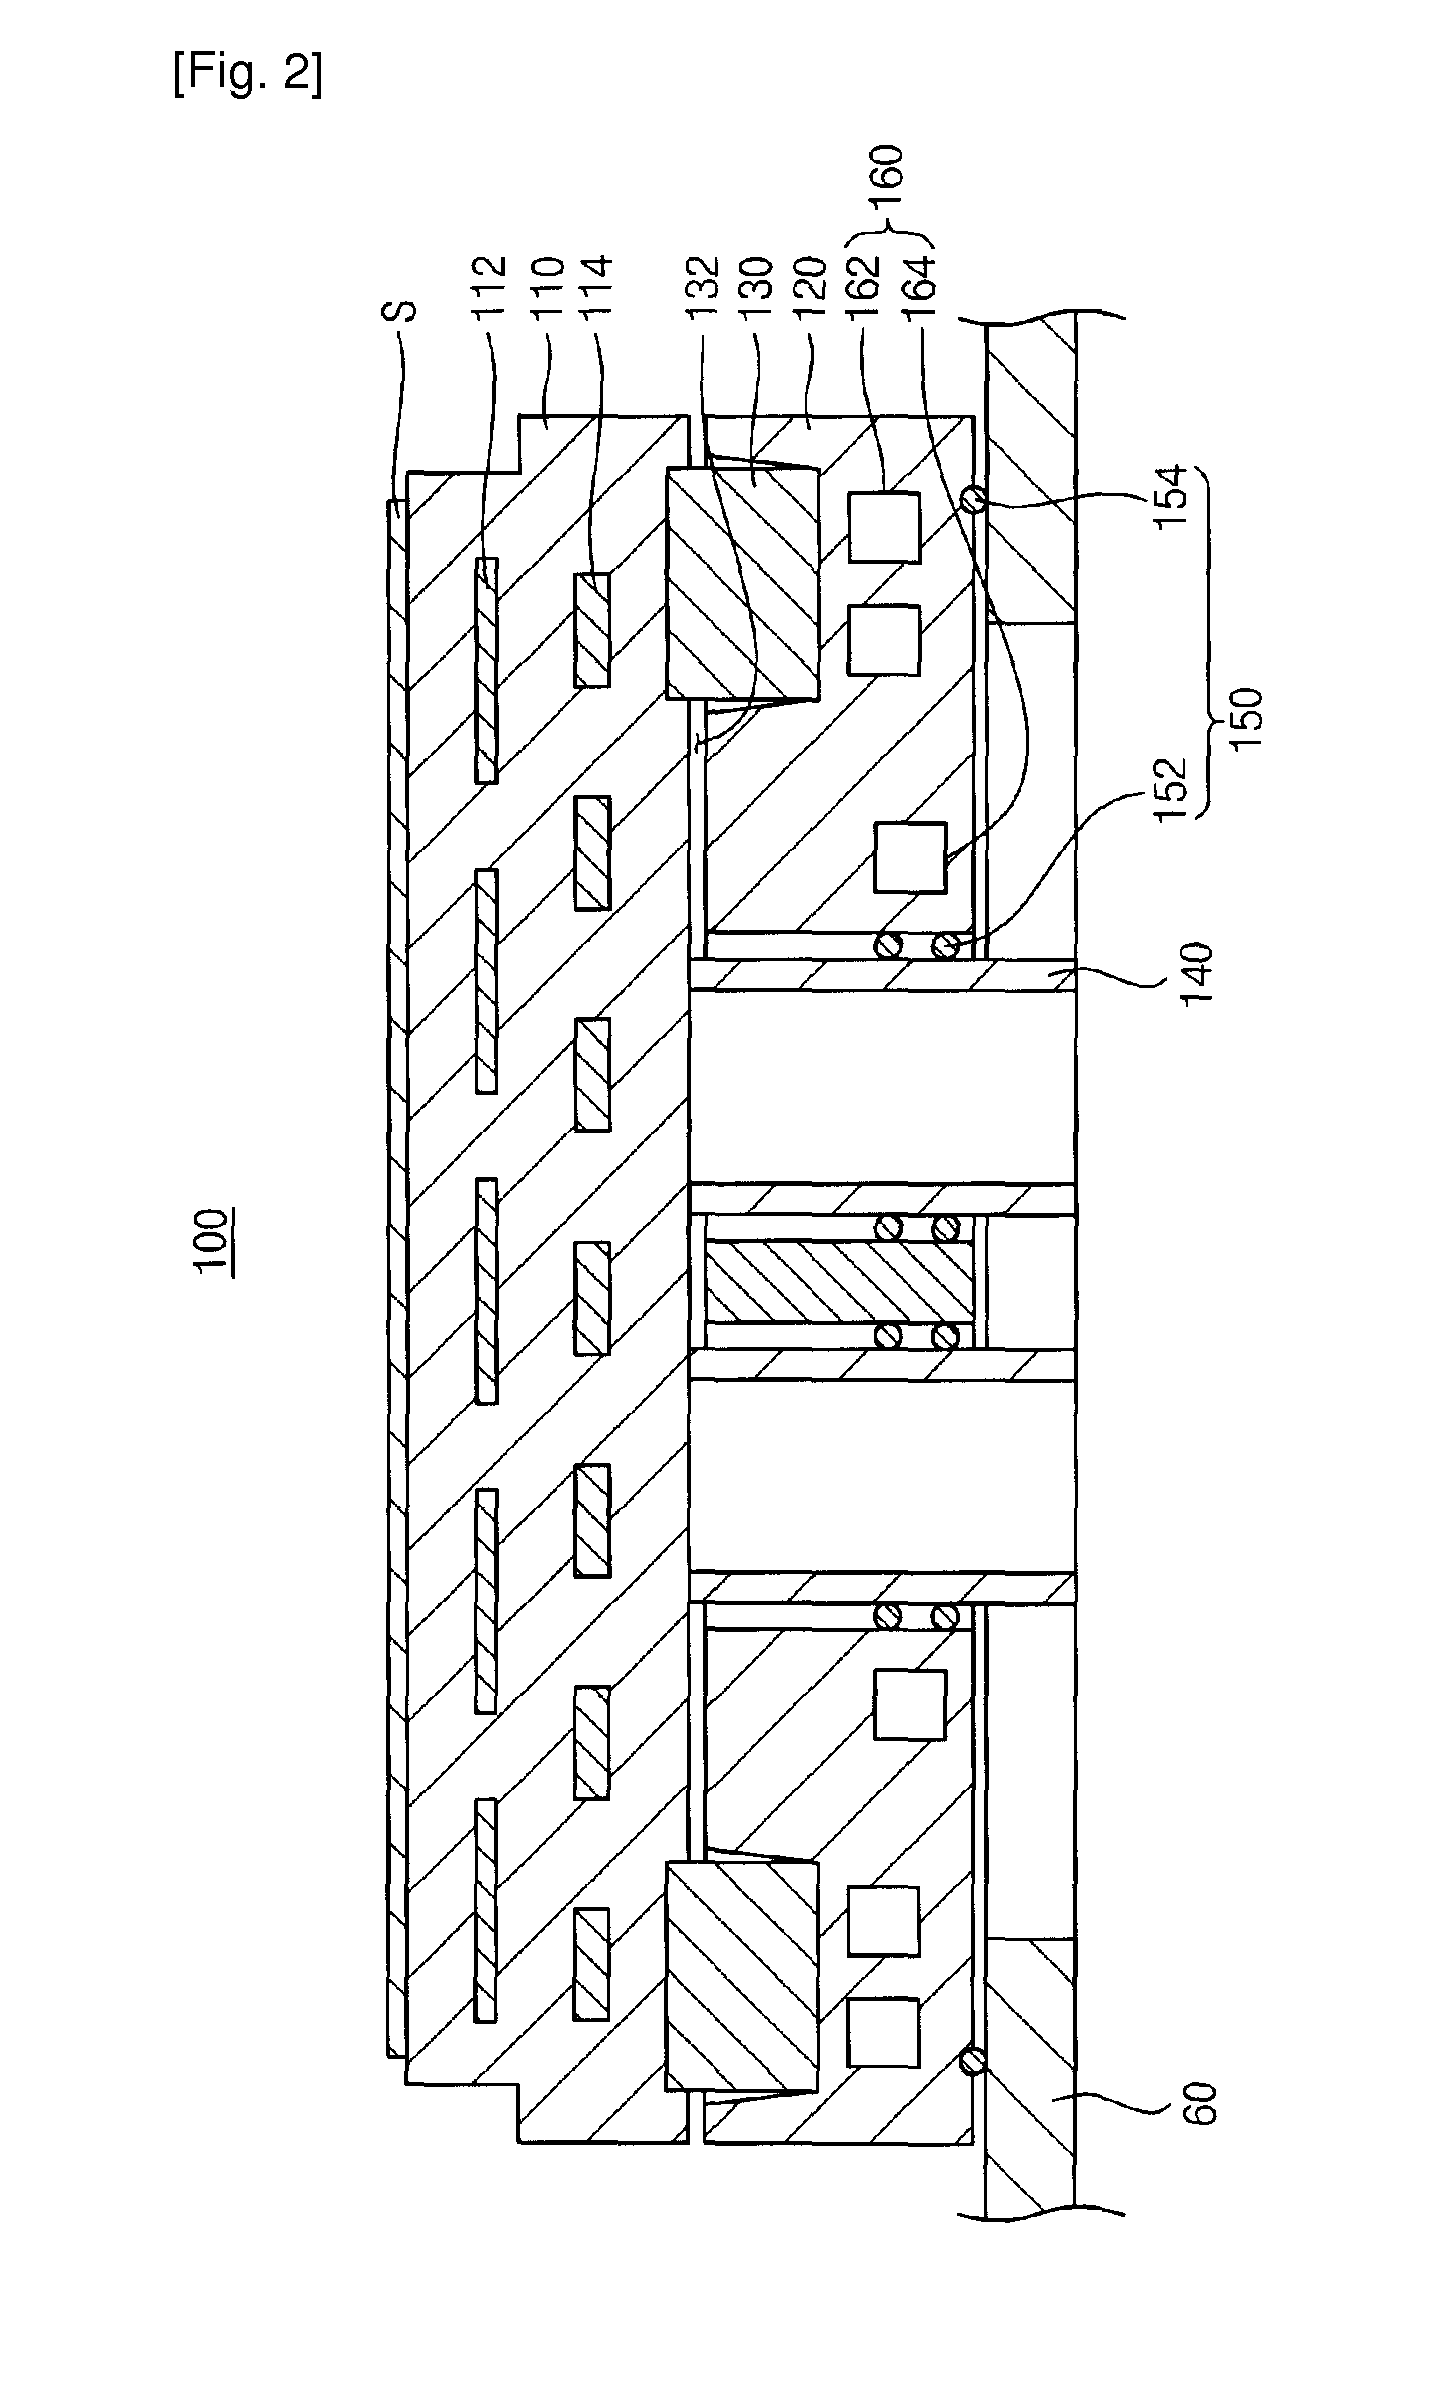 Unit for supporting a substrate and apparatus for processing a substrate having the same